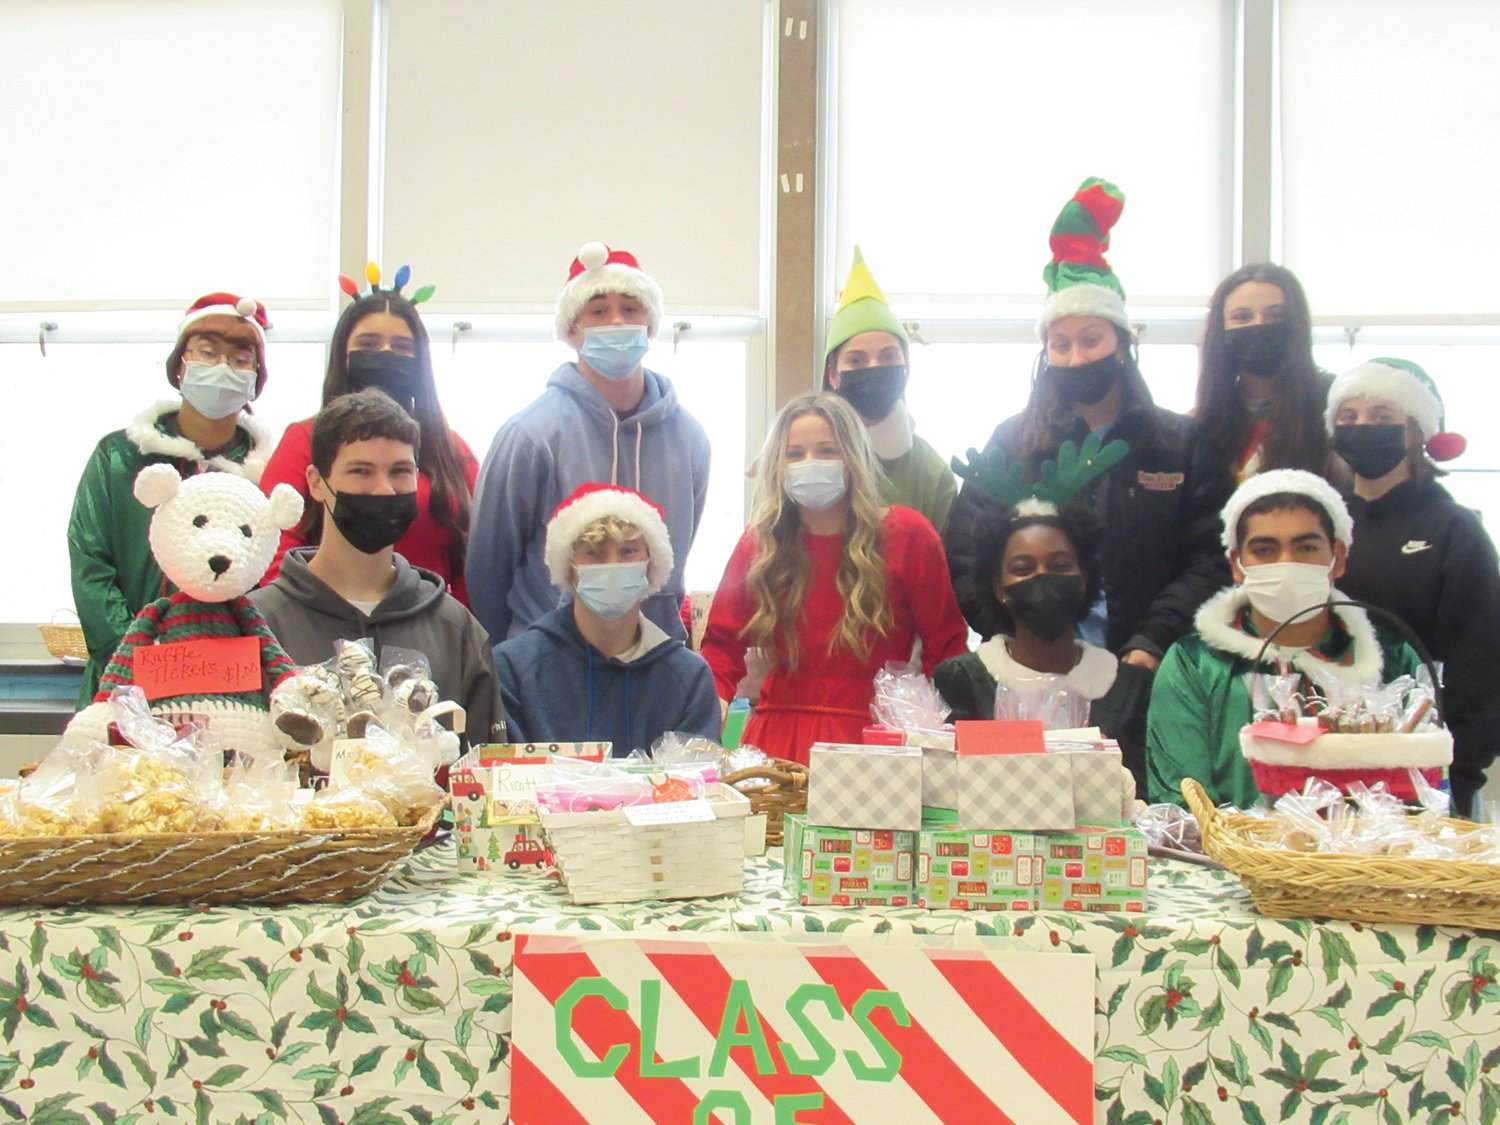 PEG’S PACK: The JHS Class of 2023, under the leadership direction of Advisor Peg Guilmette, had everything from baked goods to special treats during Saturday’s Holly Fair. The group includes: Josh Philbrick, James Guilmette, Josephine Olagundoye, Josh Galeas, Ricky Smith, Lilian Oliva, Jacob Muller, Hailey Brown, Stephanie Bruno, Talia LaFlamme and Hannah Calabro.